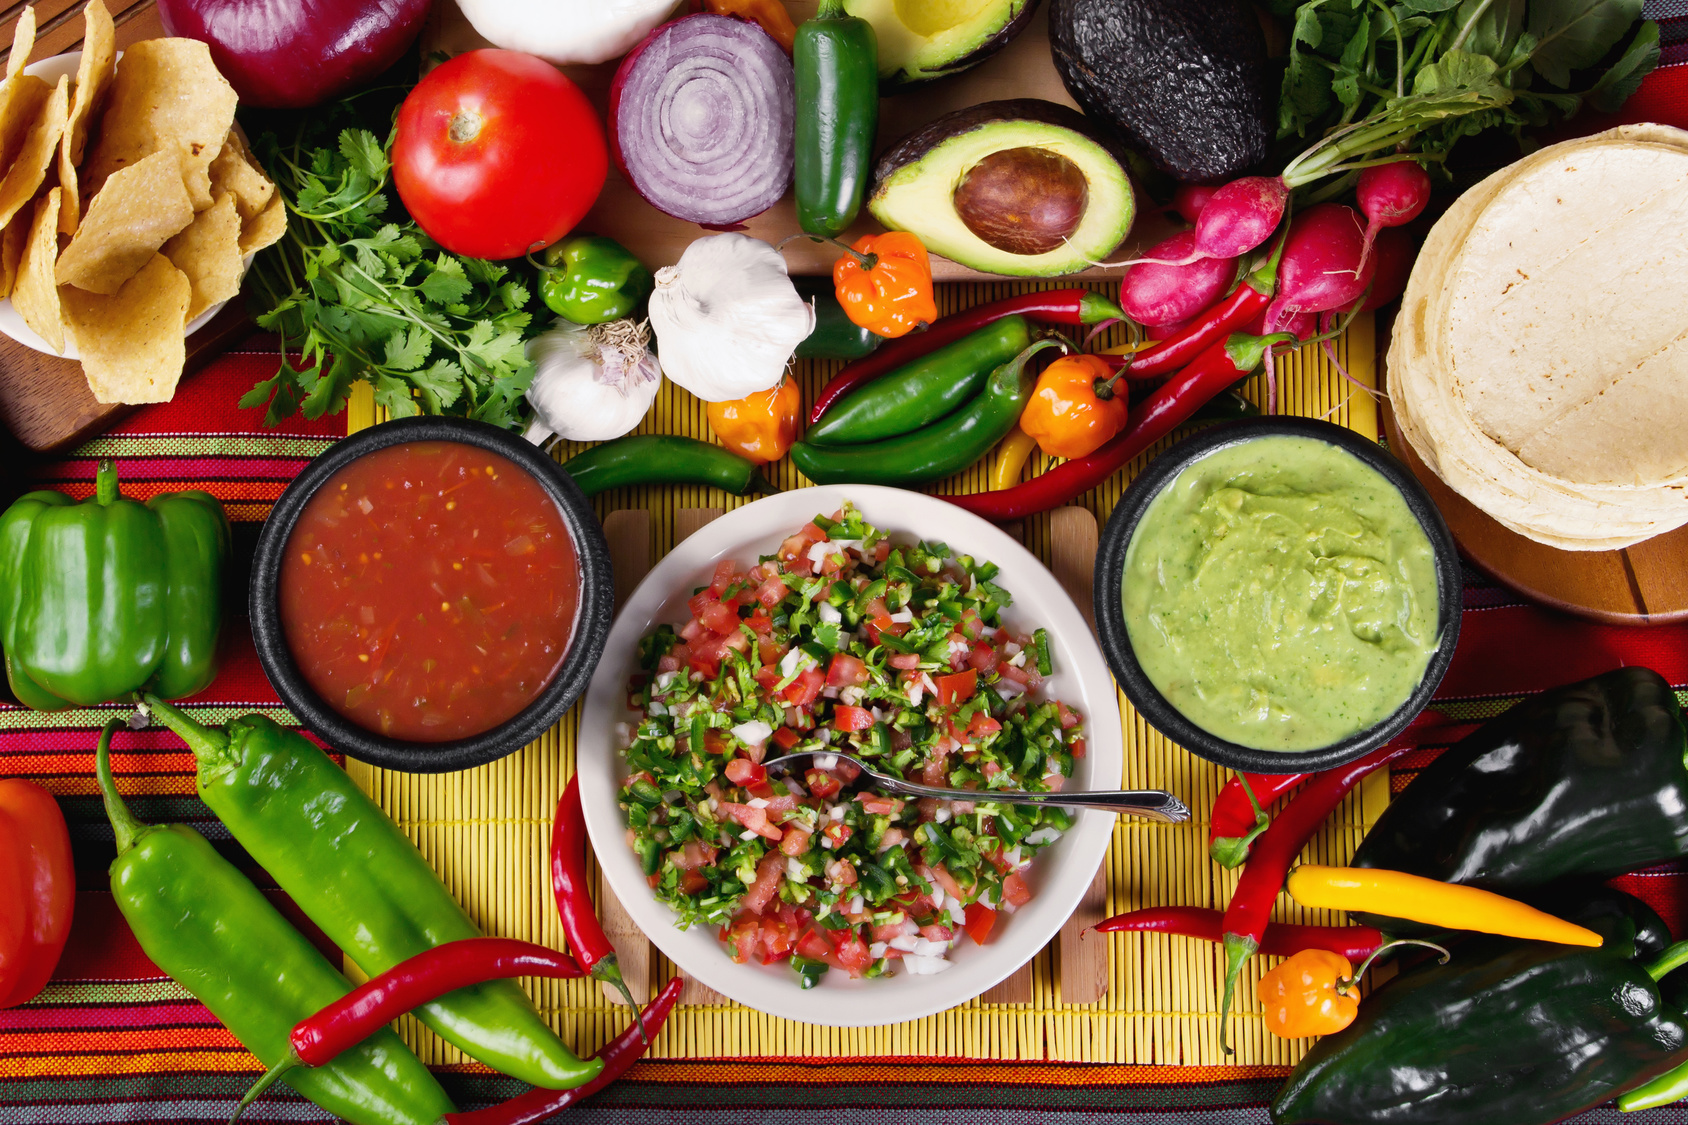 Spread with Latin American foods including salsa, guacamole and tortillas